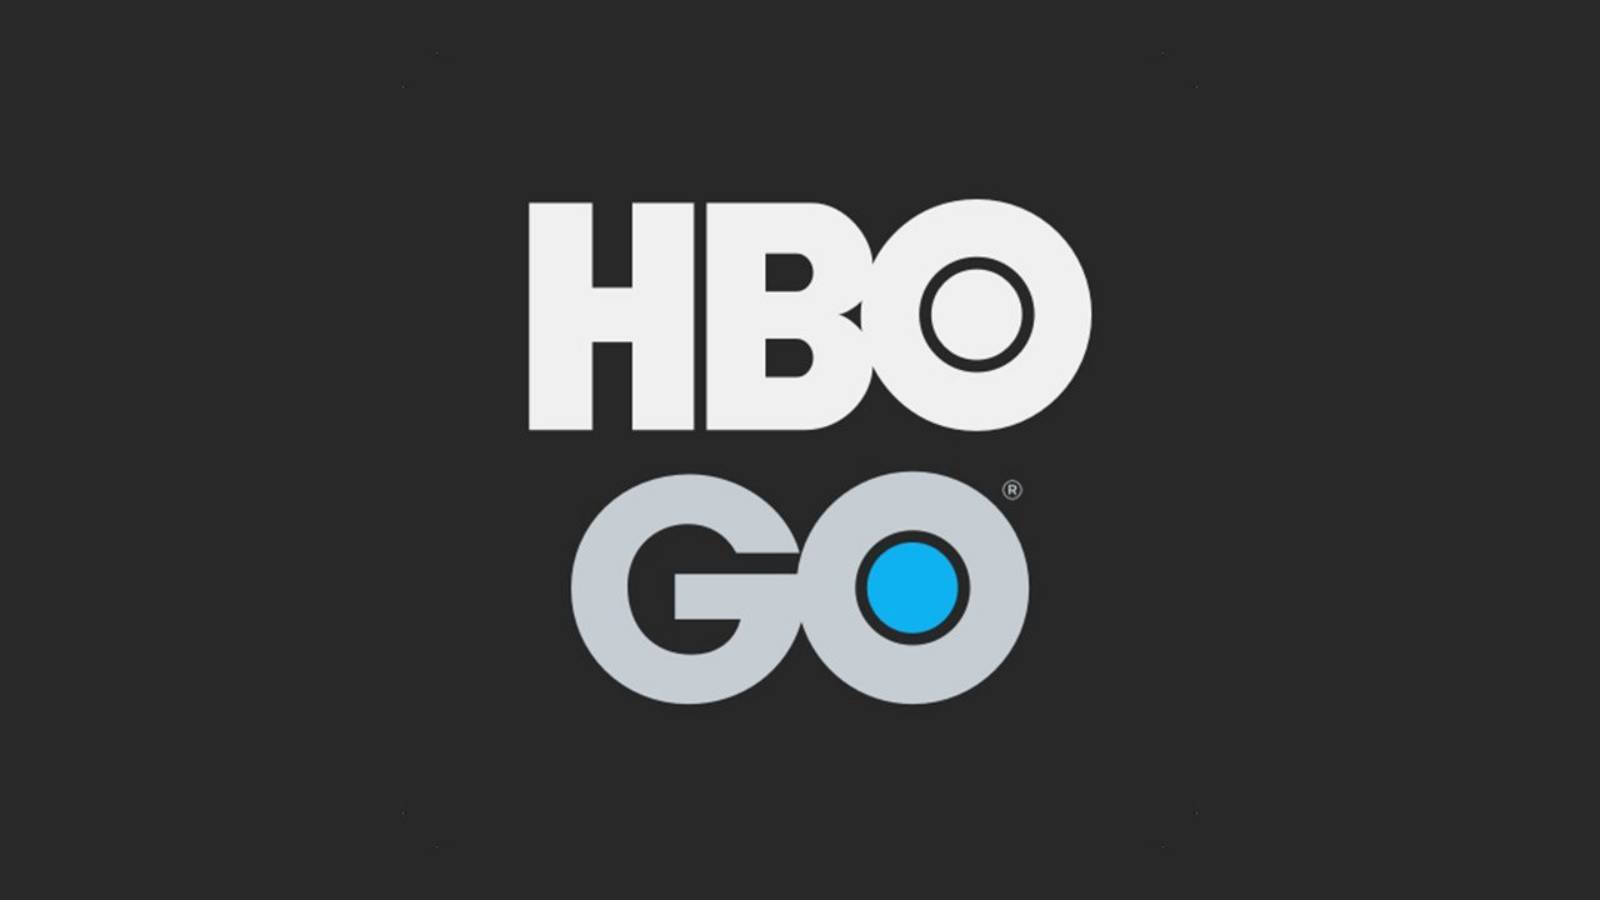 HBO Go replaced